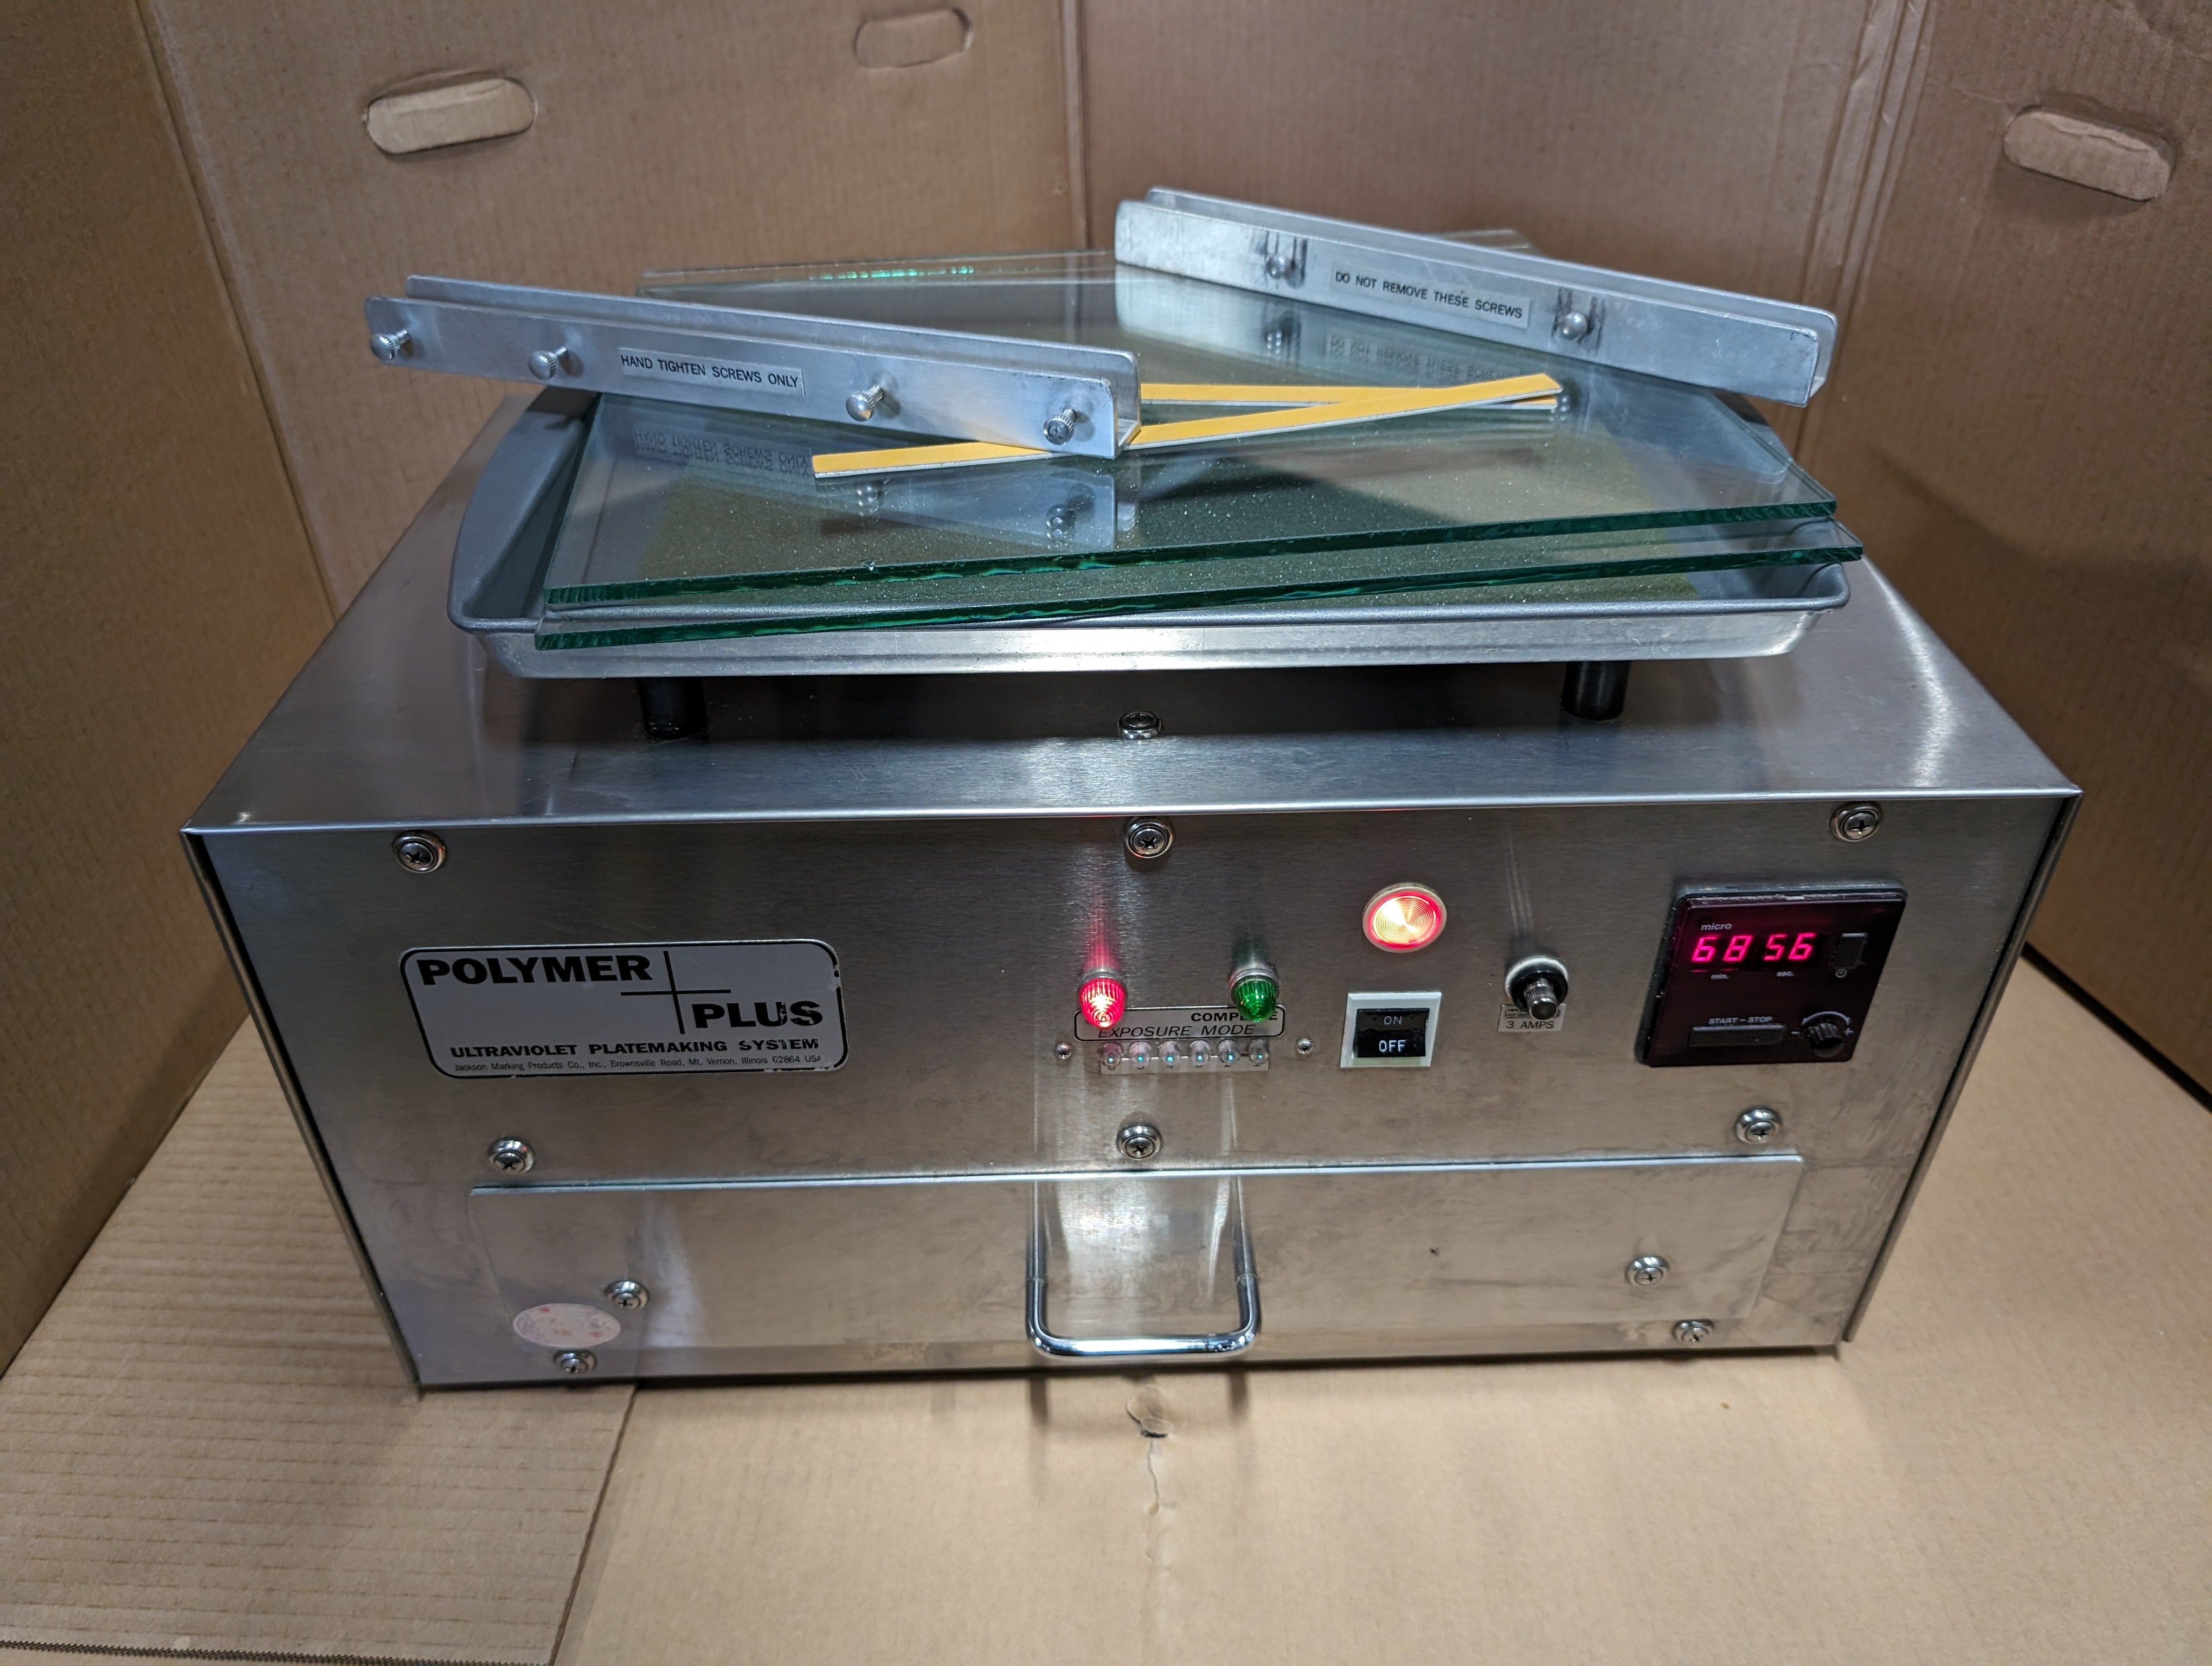 JMP Polymer Plus 200 Exposure Unit for Rubber Stamp Making Used